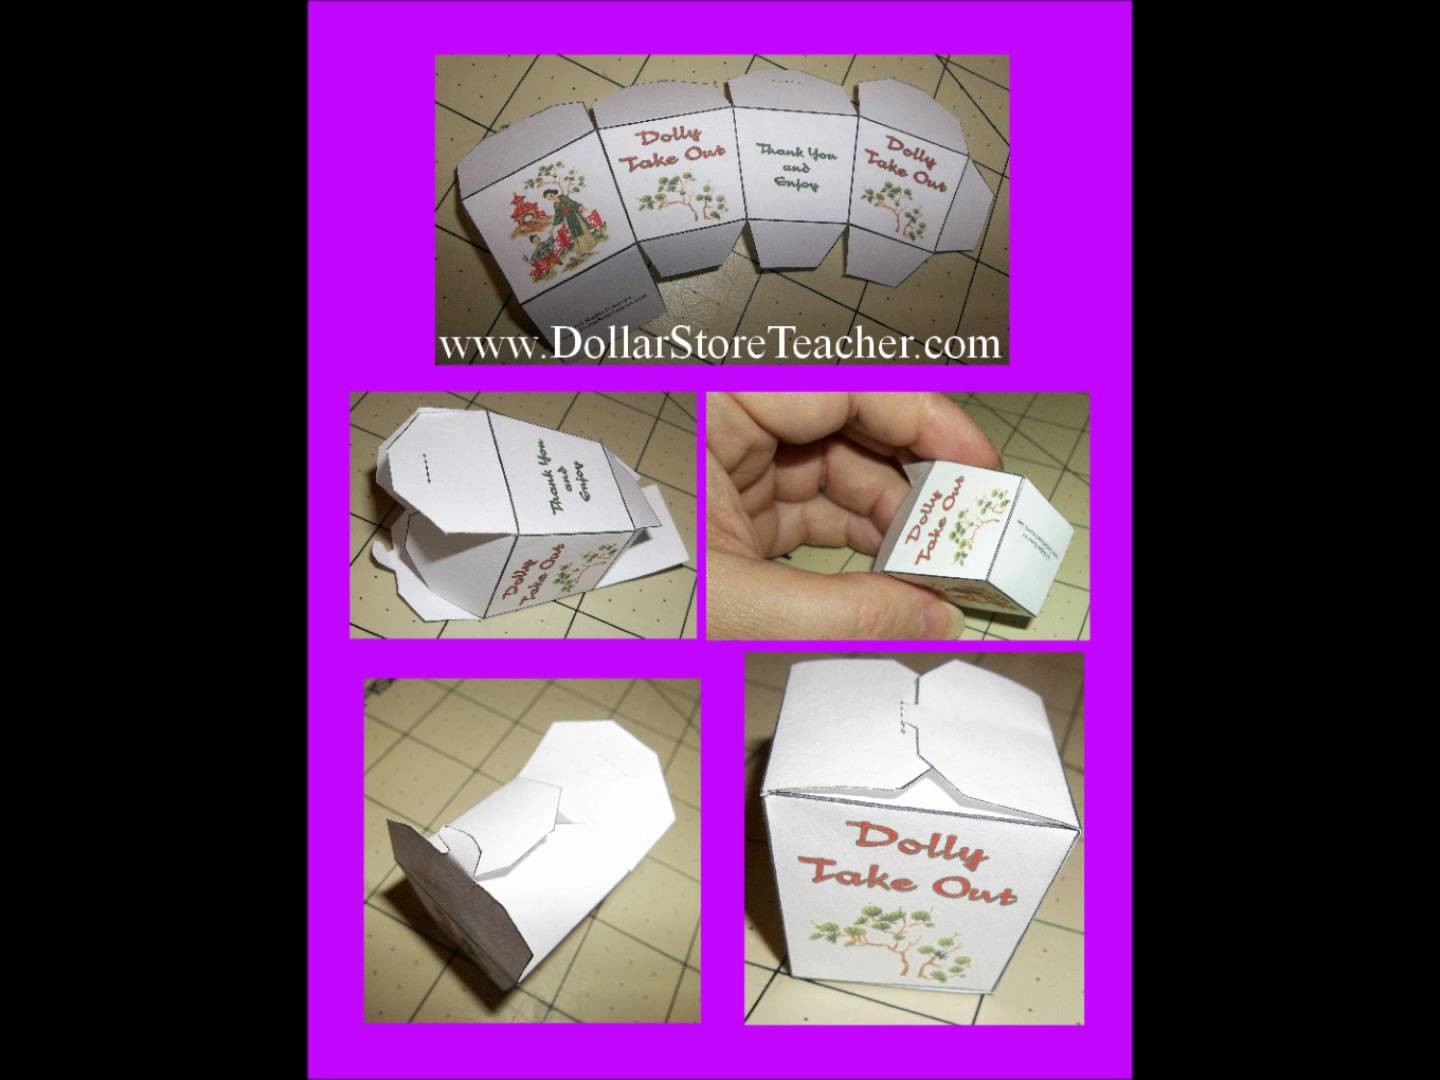 Craft for American Girl Doll Make a doll size Take Out Food Box for your American Girl Doll